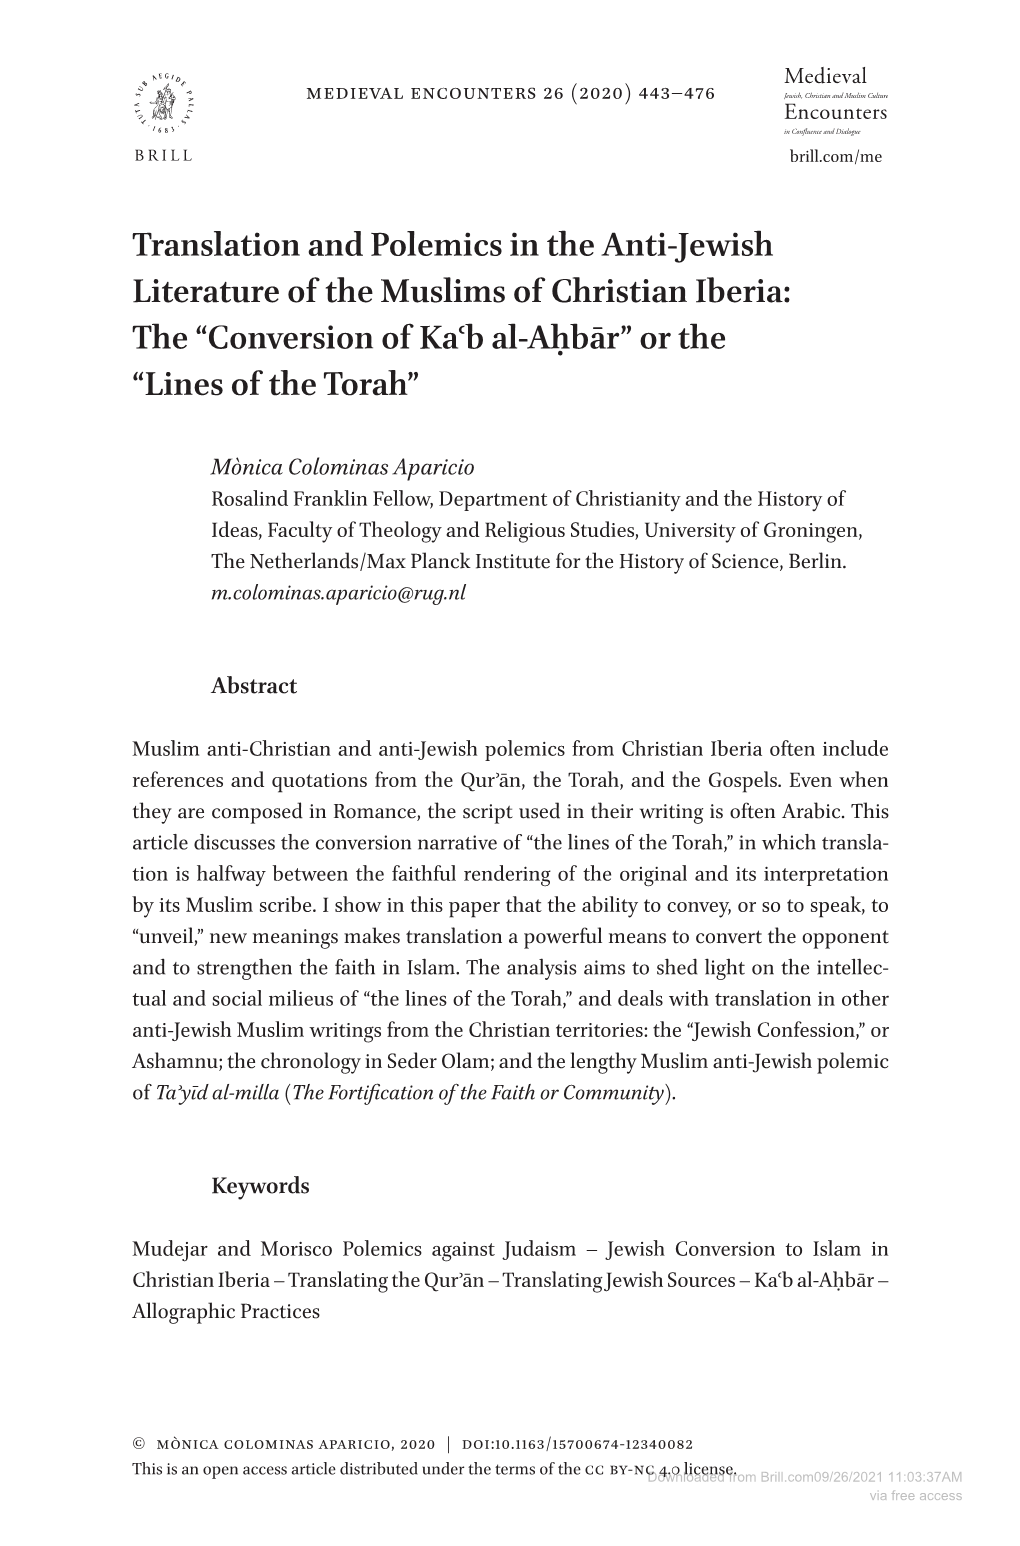 Translation and Polemics in the Anti-Jewish Literature of the Muslims of Christian Iberia: the “Conversion of Kaʿb Al-Aḥbār” Or the “Lines of the Torah”